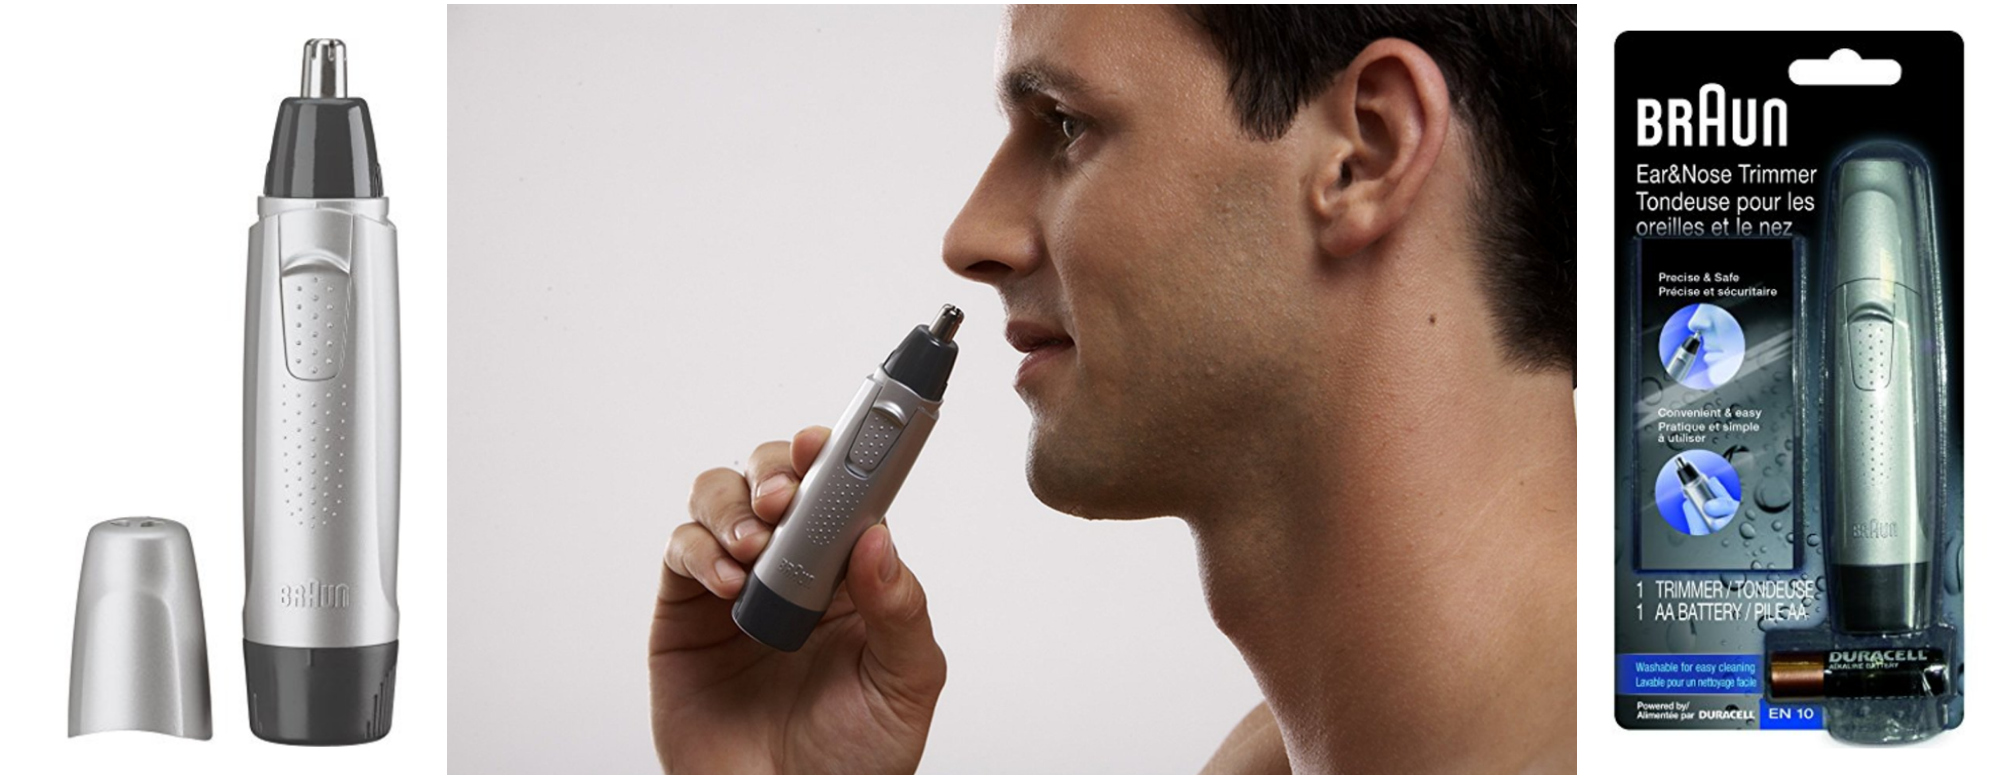 Braun Ear and Nose Hair Trimmer -- $7.09 (reg. $17.99), BEST Price!